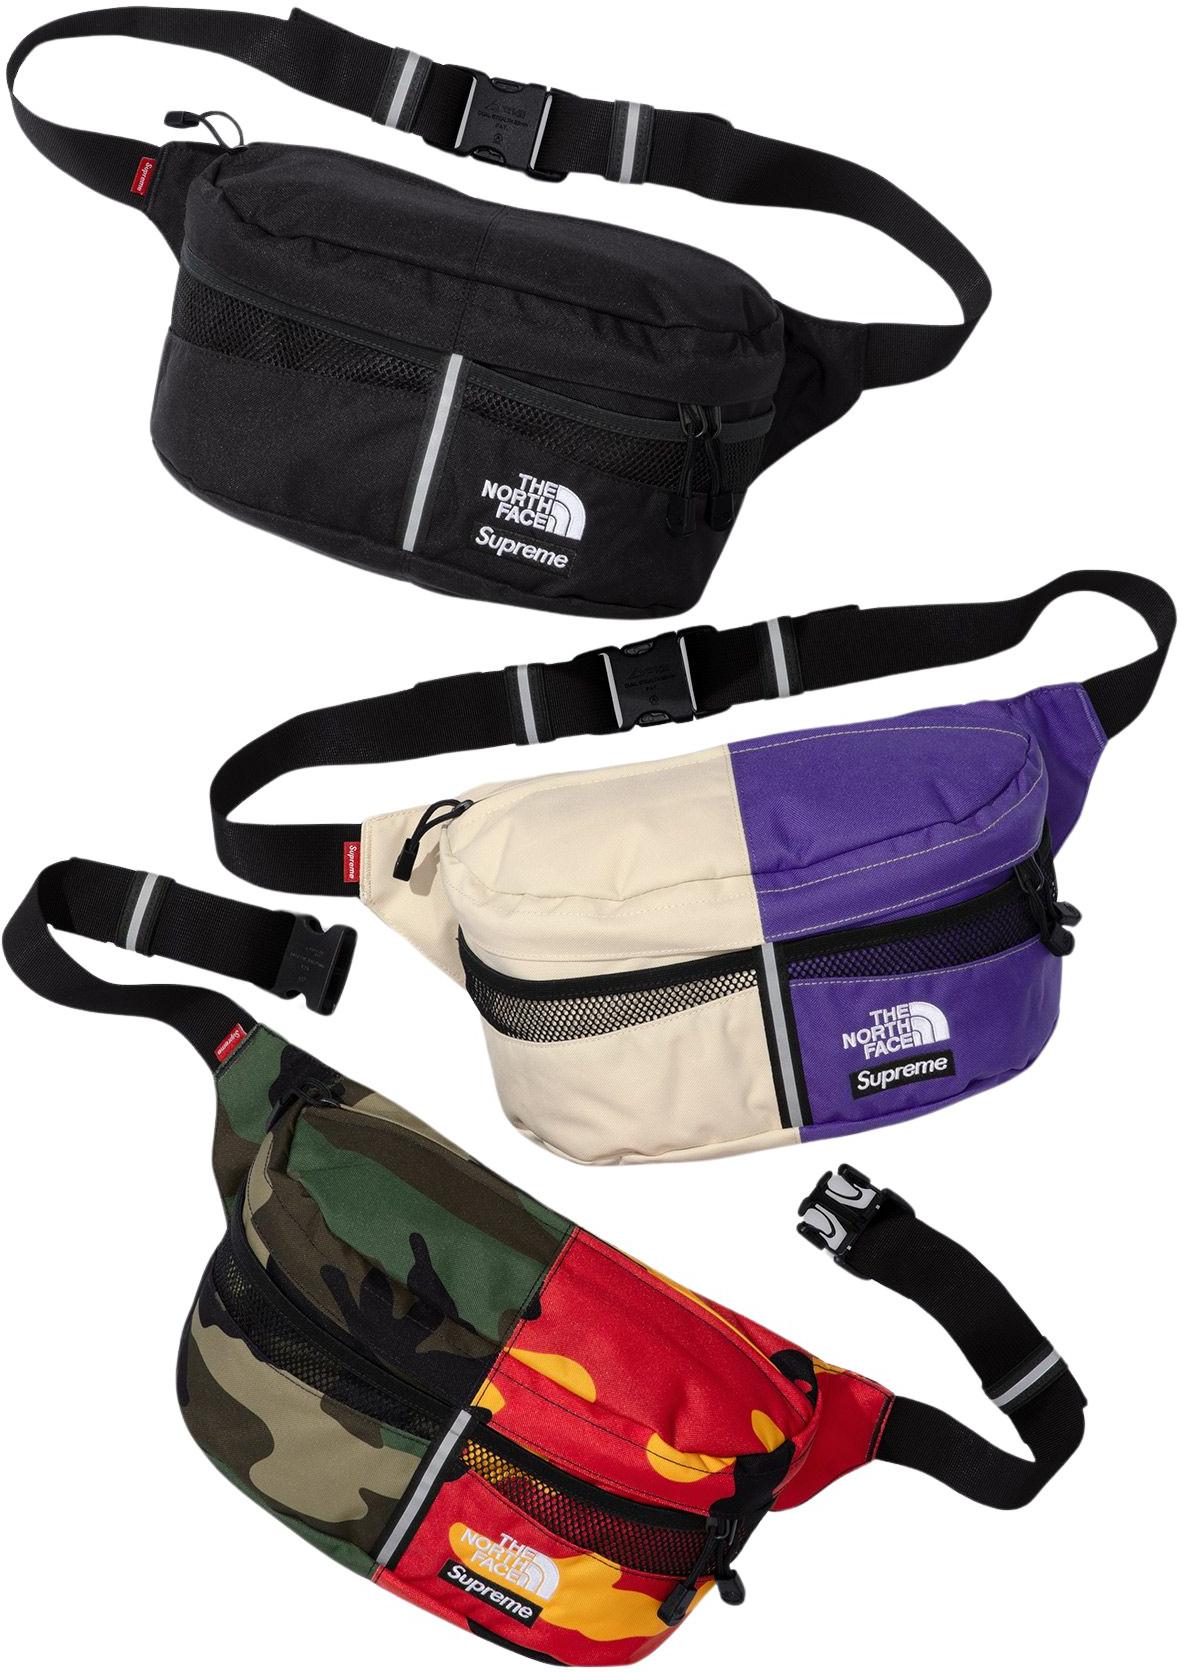 Explore Utility Tote | The North Face | Utility tote bag, Bags, Tote